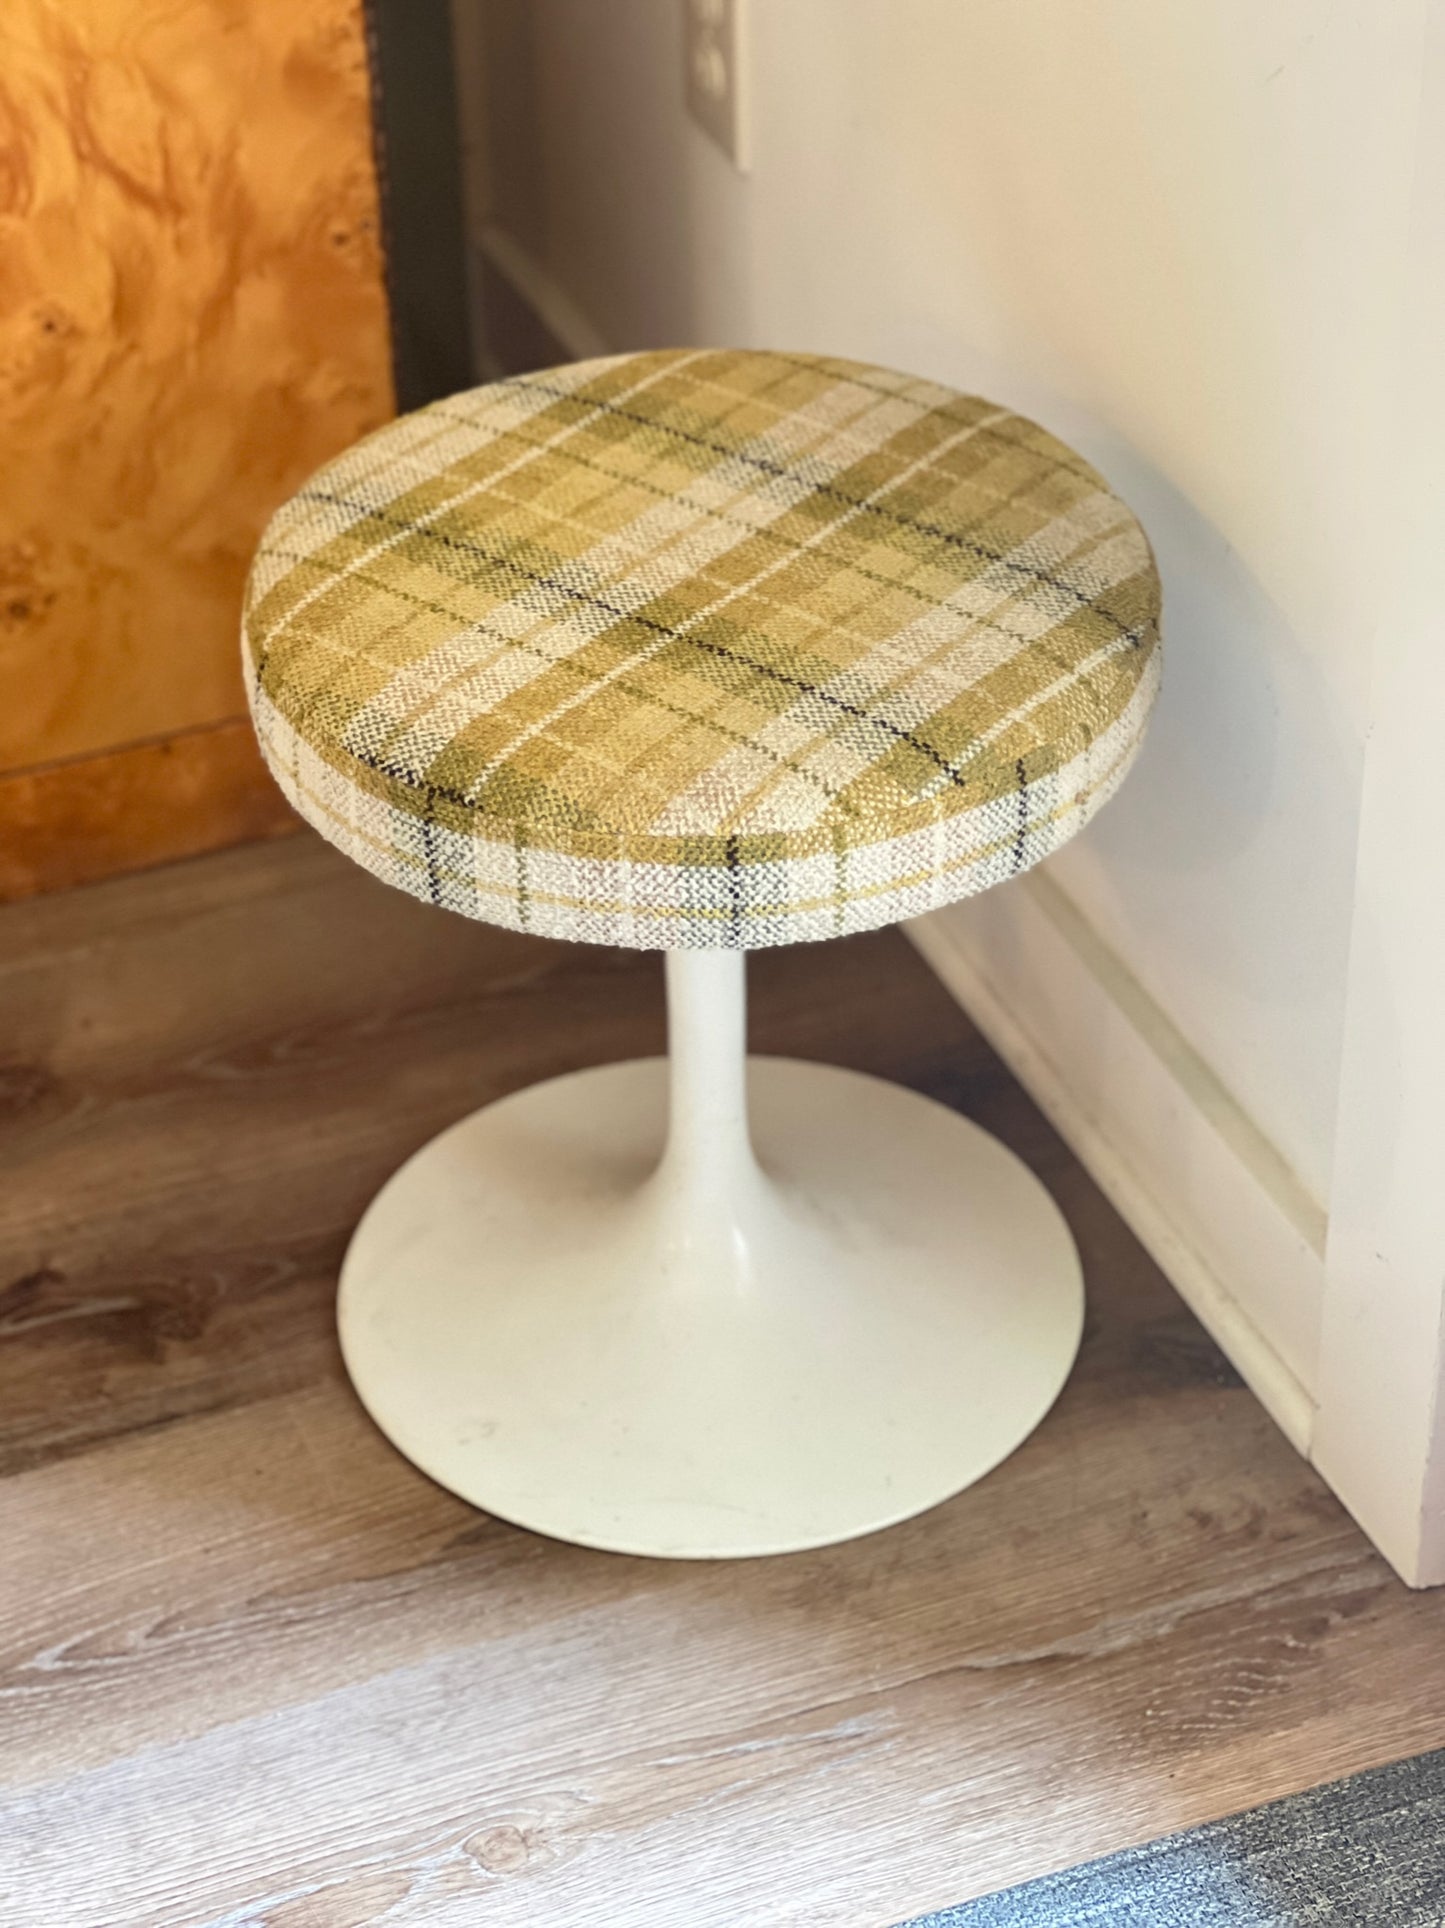 Vintage Pair of Tulip Stools with Green Plaid Upholstery